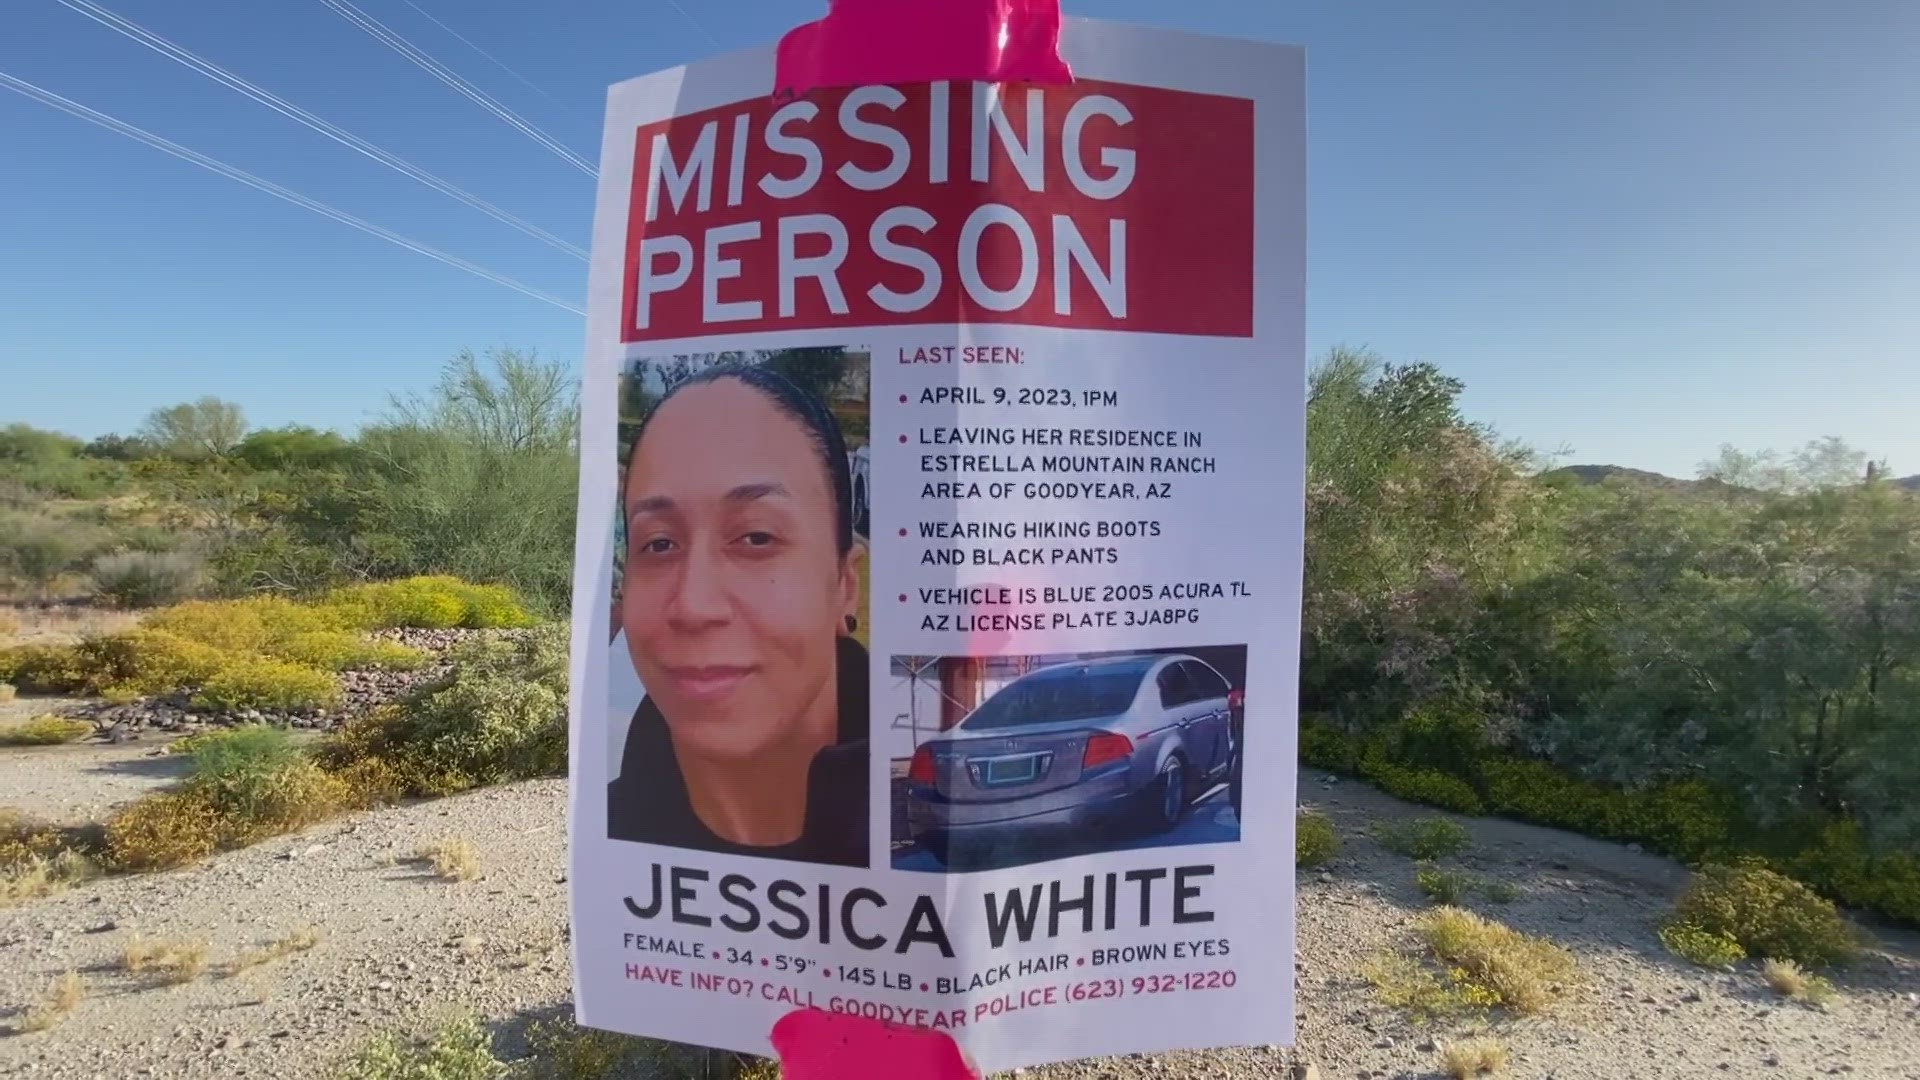 Thirty-four-year-old Jessica White has been missing since Easter Sunday.